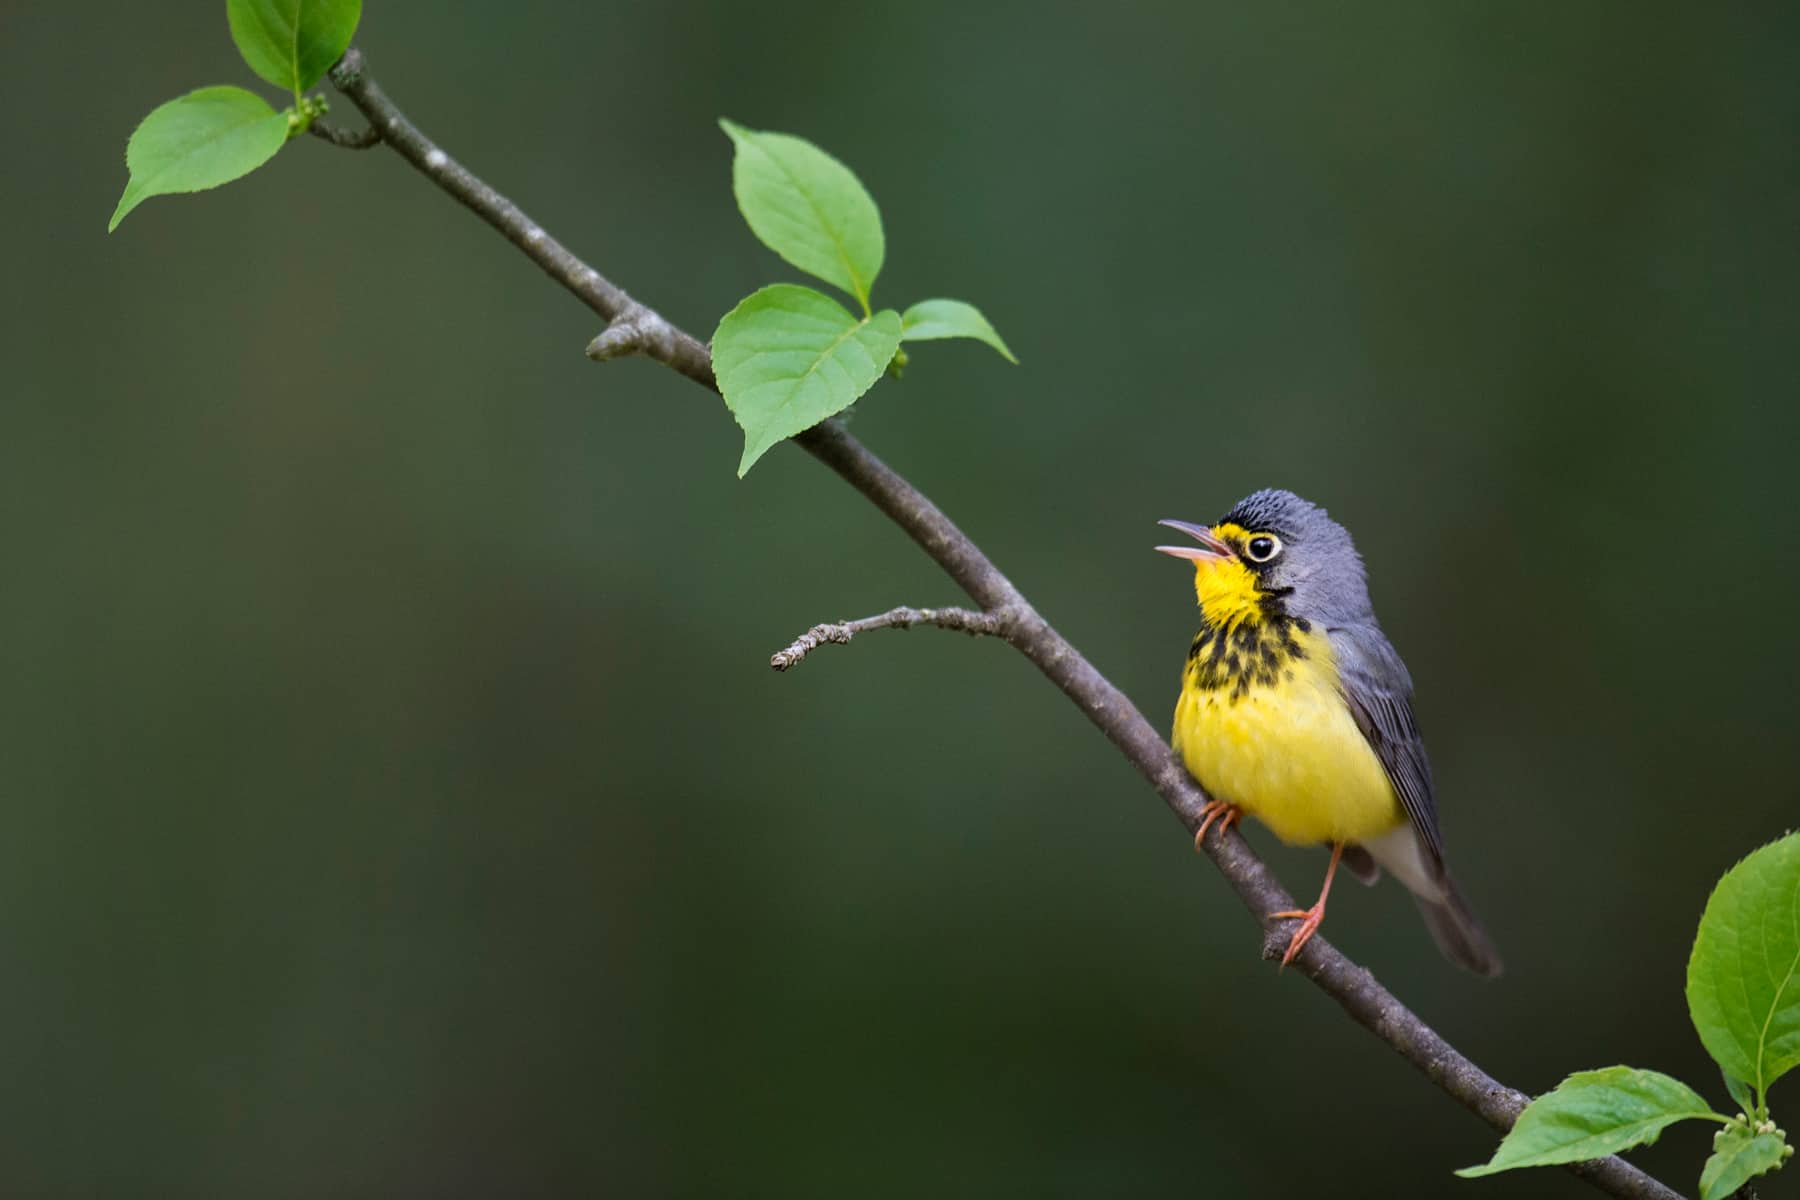 Canada warbler perched in a tree, singing